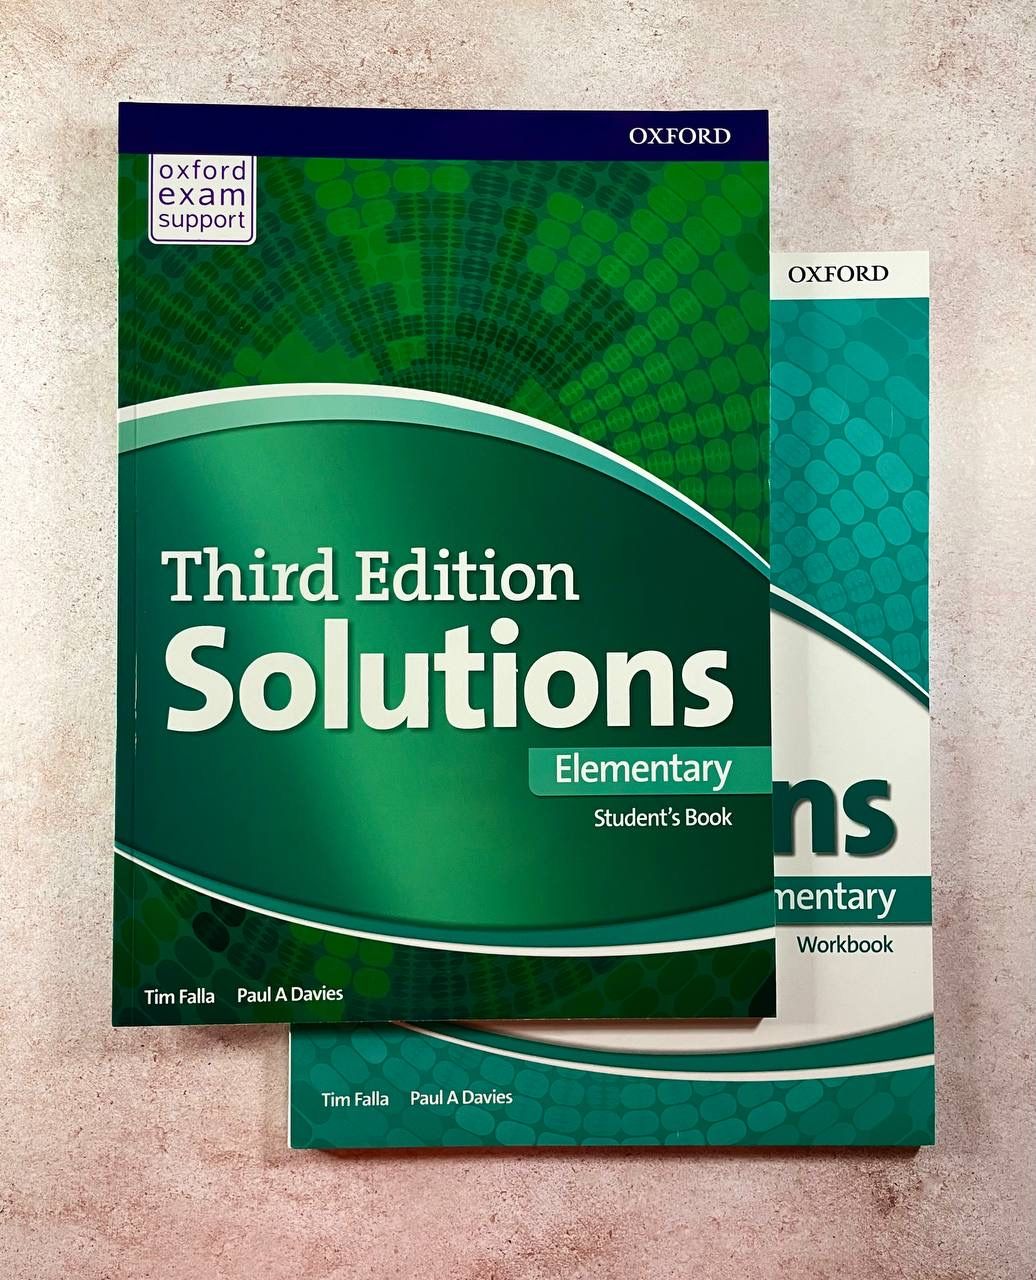 Solutions elementary 3rd audio students book. Учебник solutions Elementary. Учебники third Edition solutions Elementary Workbook. Solutions Elementary Workbook гдз. Solutions Elementary student's book.